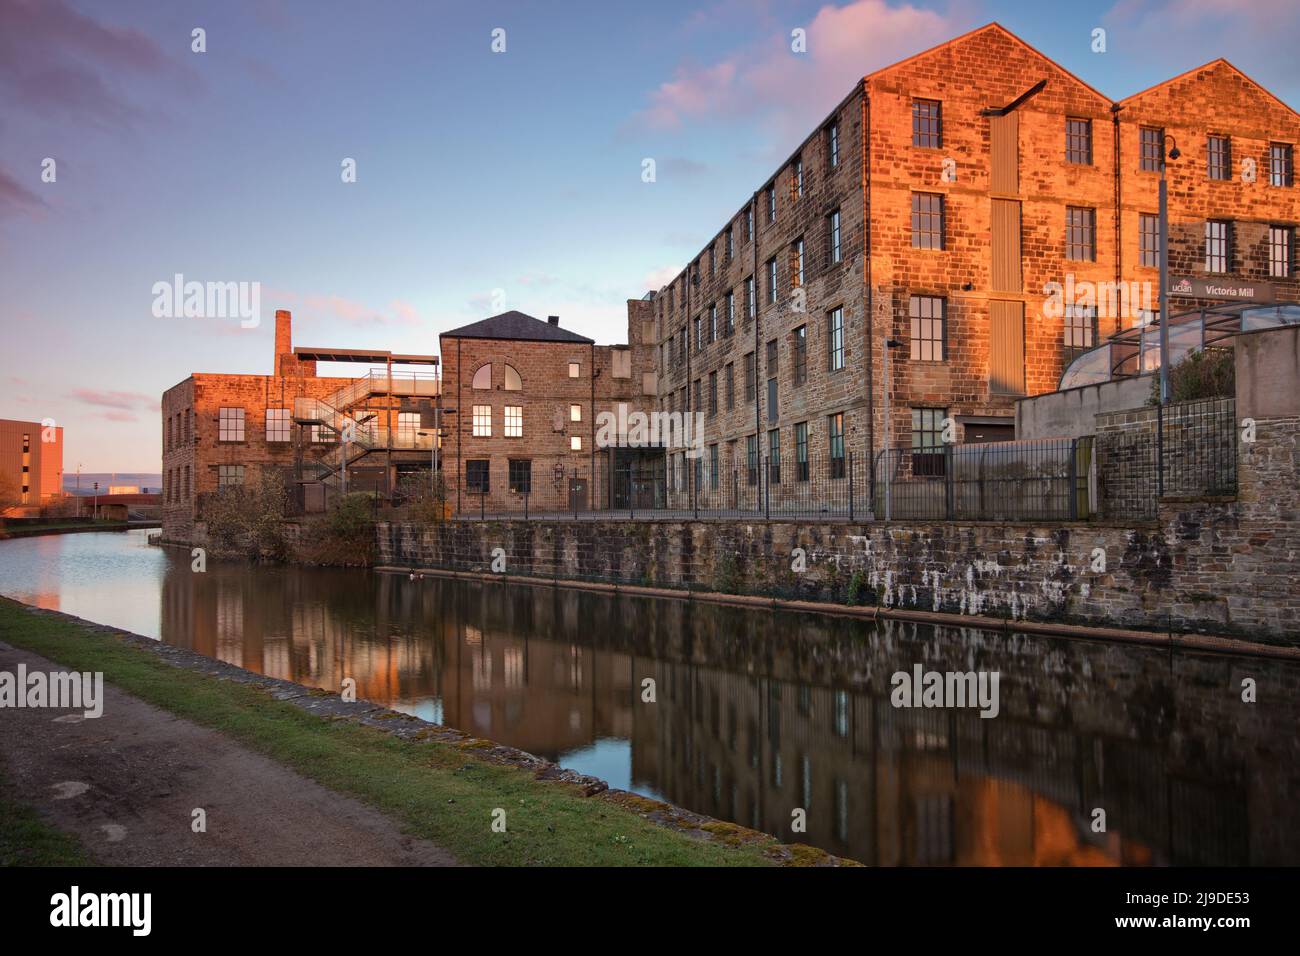 The renovated Victoria Mill, now part of UCLAN, Burnley College. Situated on the Leeds and Liverpool Canal, at Weavers Triangle, Burnley Stock Photo